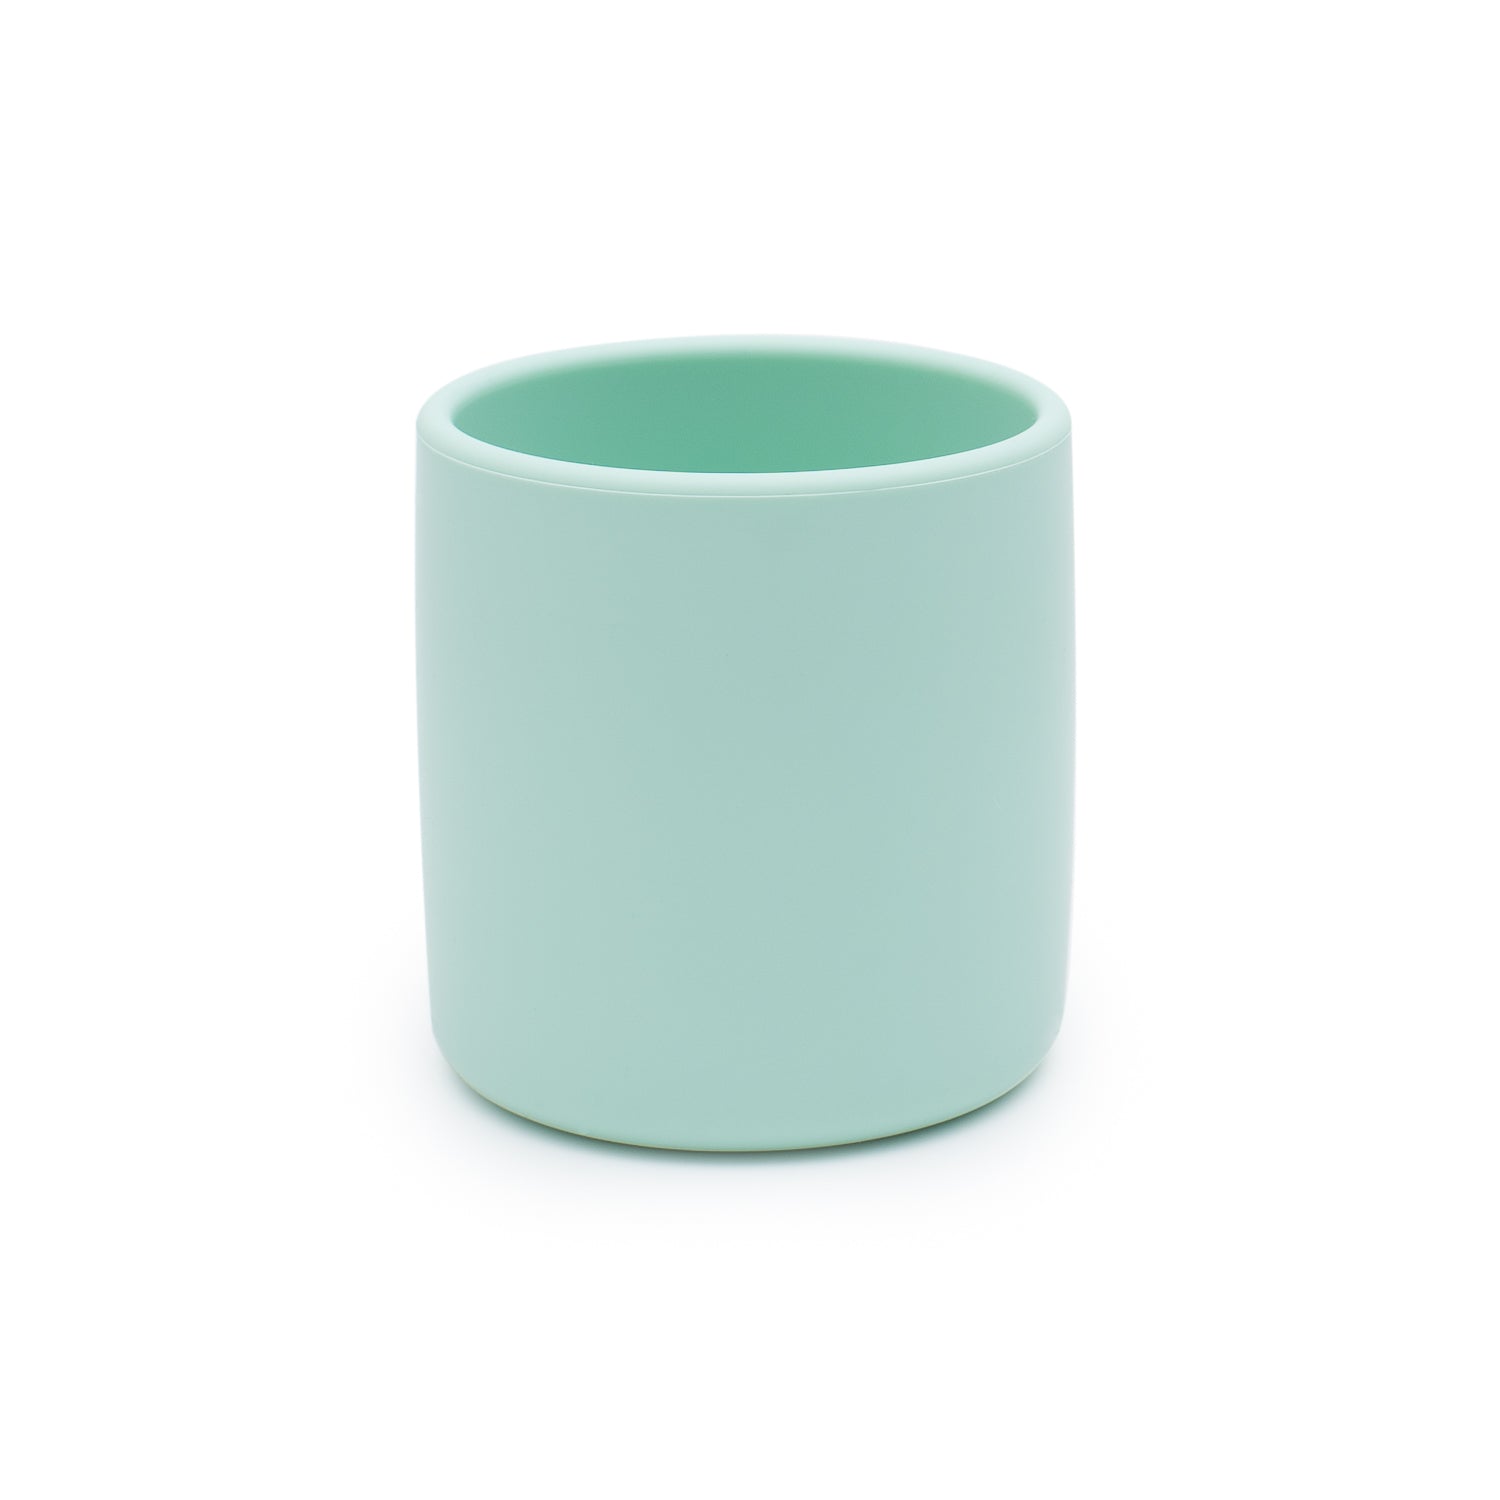 Mint green silicone grip cup